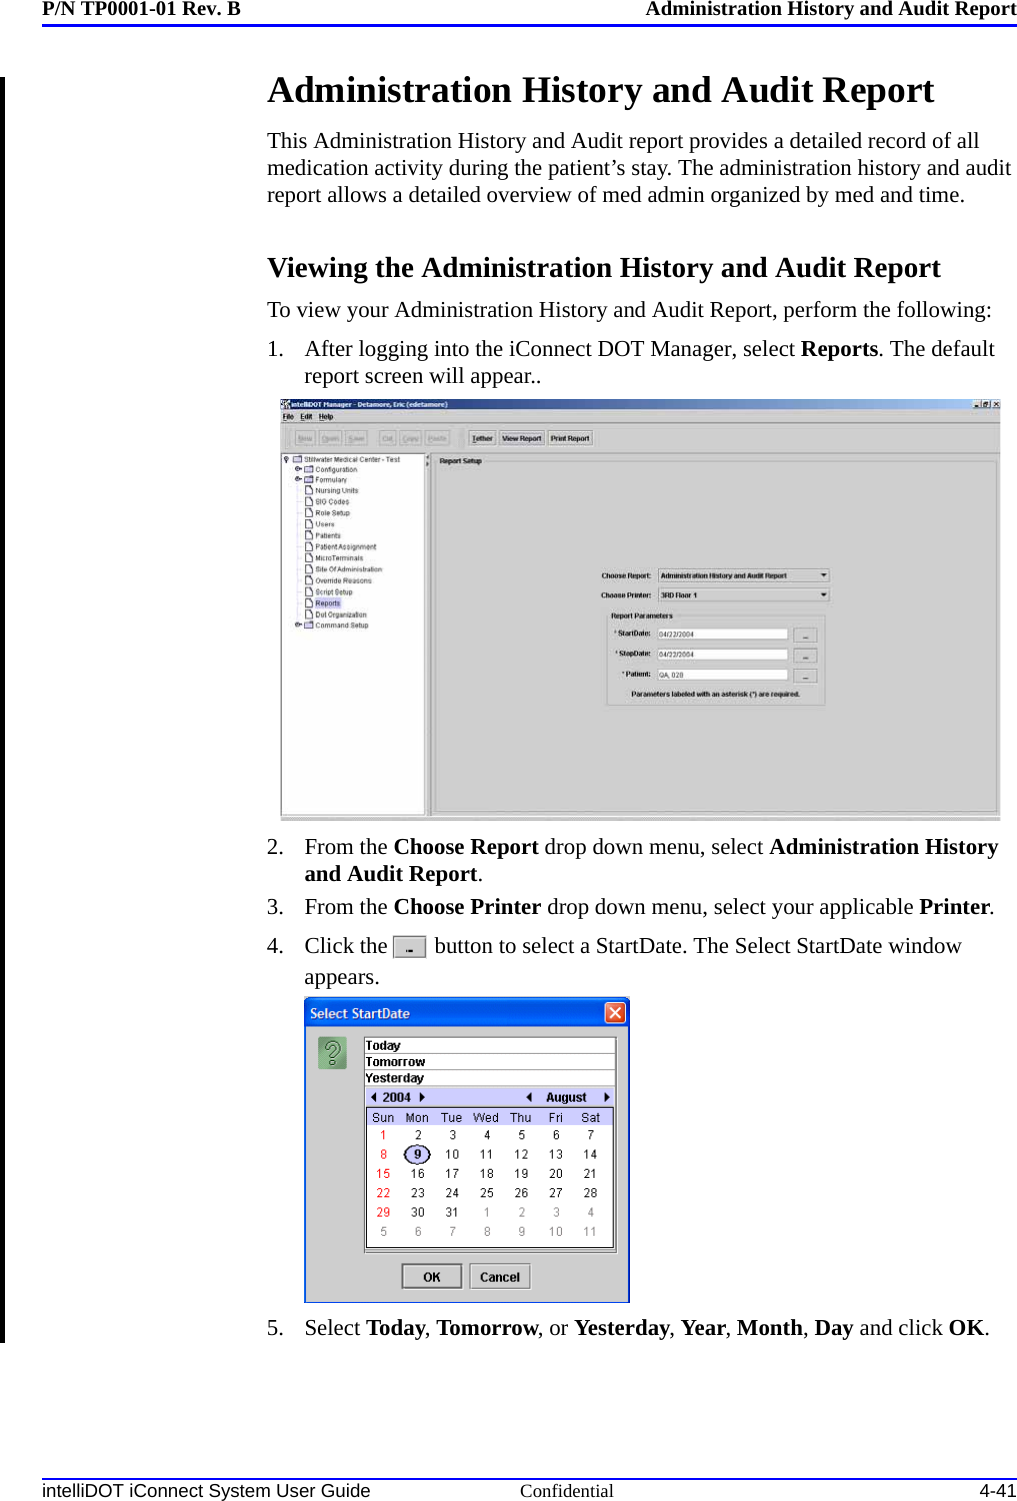 P/N TP0001-01 Rev. B Administration History and Audit ReportintelliDOT iConnect System User Guide Confidential 4-41Administration History and Audit Report This Administration History and Audit report provides a detailed record of all medication activity during the patient’s stay. The administration history and audit report allows a detailed overview of med admin organized by med and time.Viewing the Administration History and Audit ReportTo view your Administration History and Audit Report, perform the following:1. After logging into the iConnect DOT Manager, select Reports. The default report screen will appear..2. From the Choose Report drop down menu, select Administration History and Audit Report.3. From the Choose Printer drop down menu, select your applicable Printer.4. Click the  button to select a StartDate. The Select StartDate window appears.5. Select Today, Tomorrow, or Yesterday, Year, Month, Day and click OK.